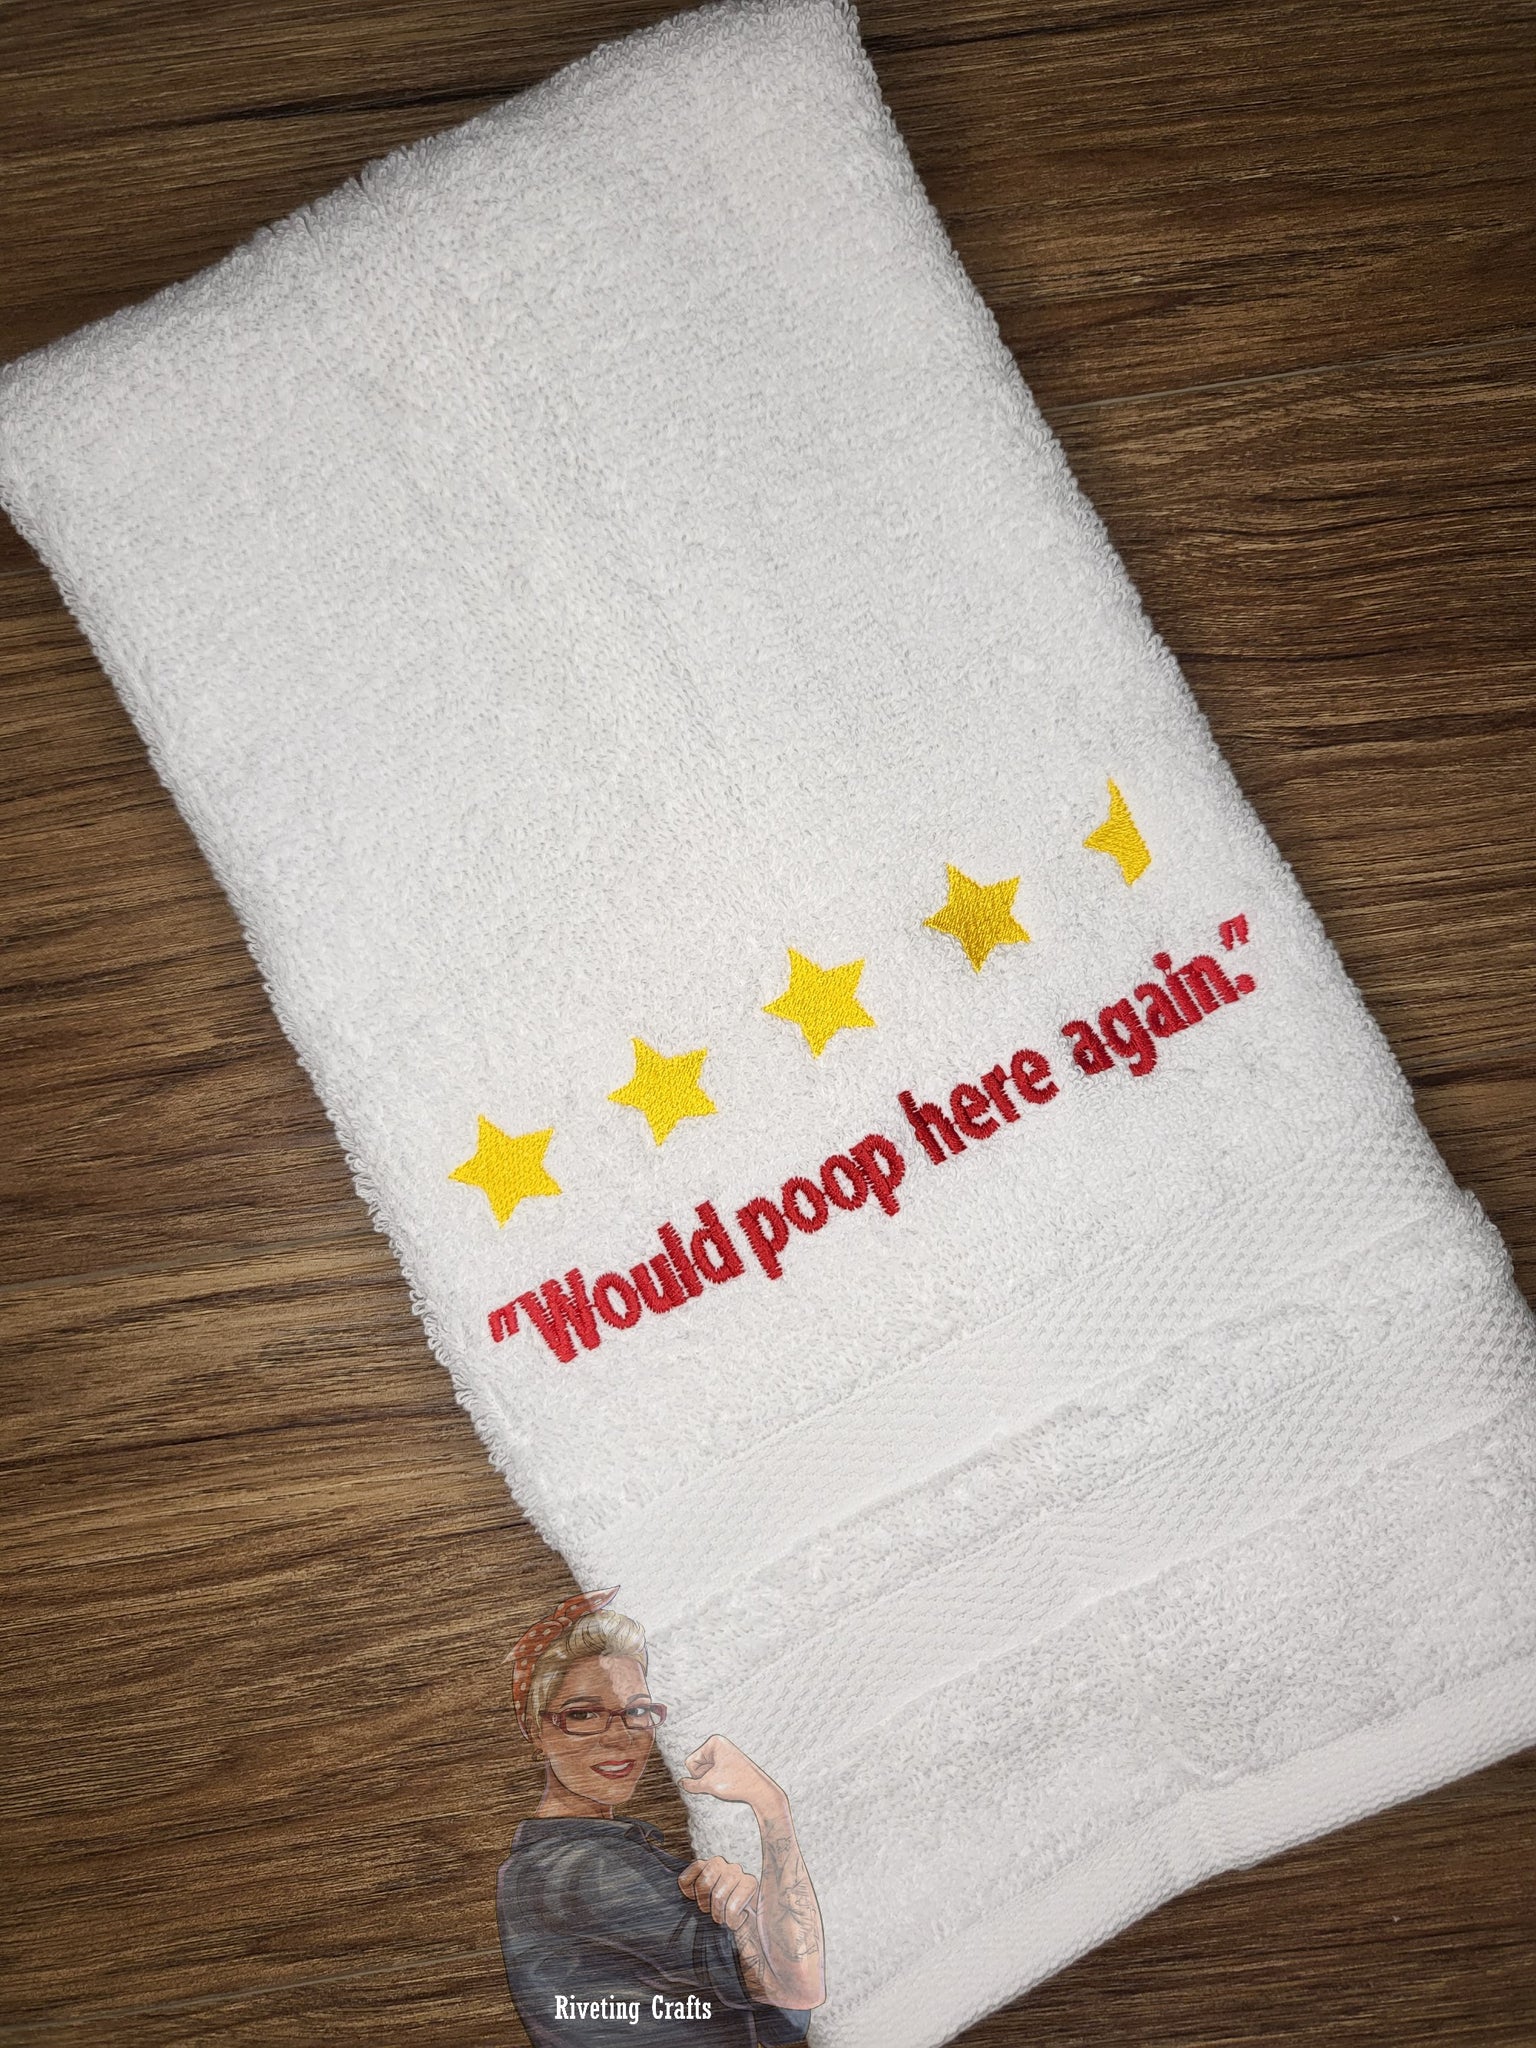 Embroidered Bathroom Hand Towel, Have a Nice Poop, White Towel